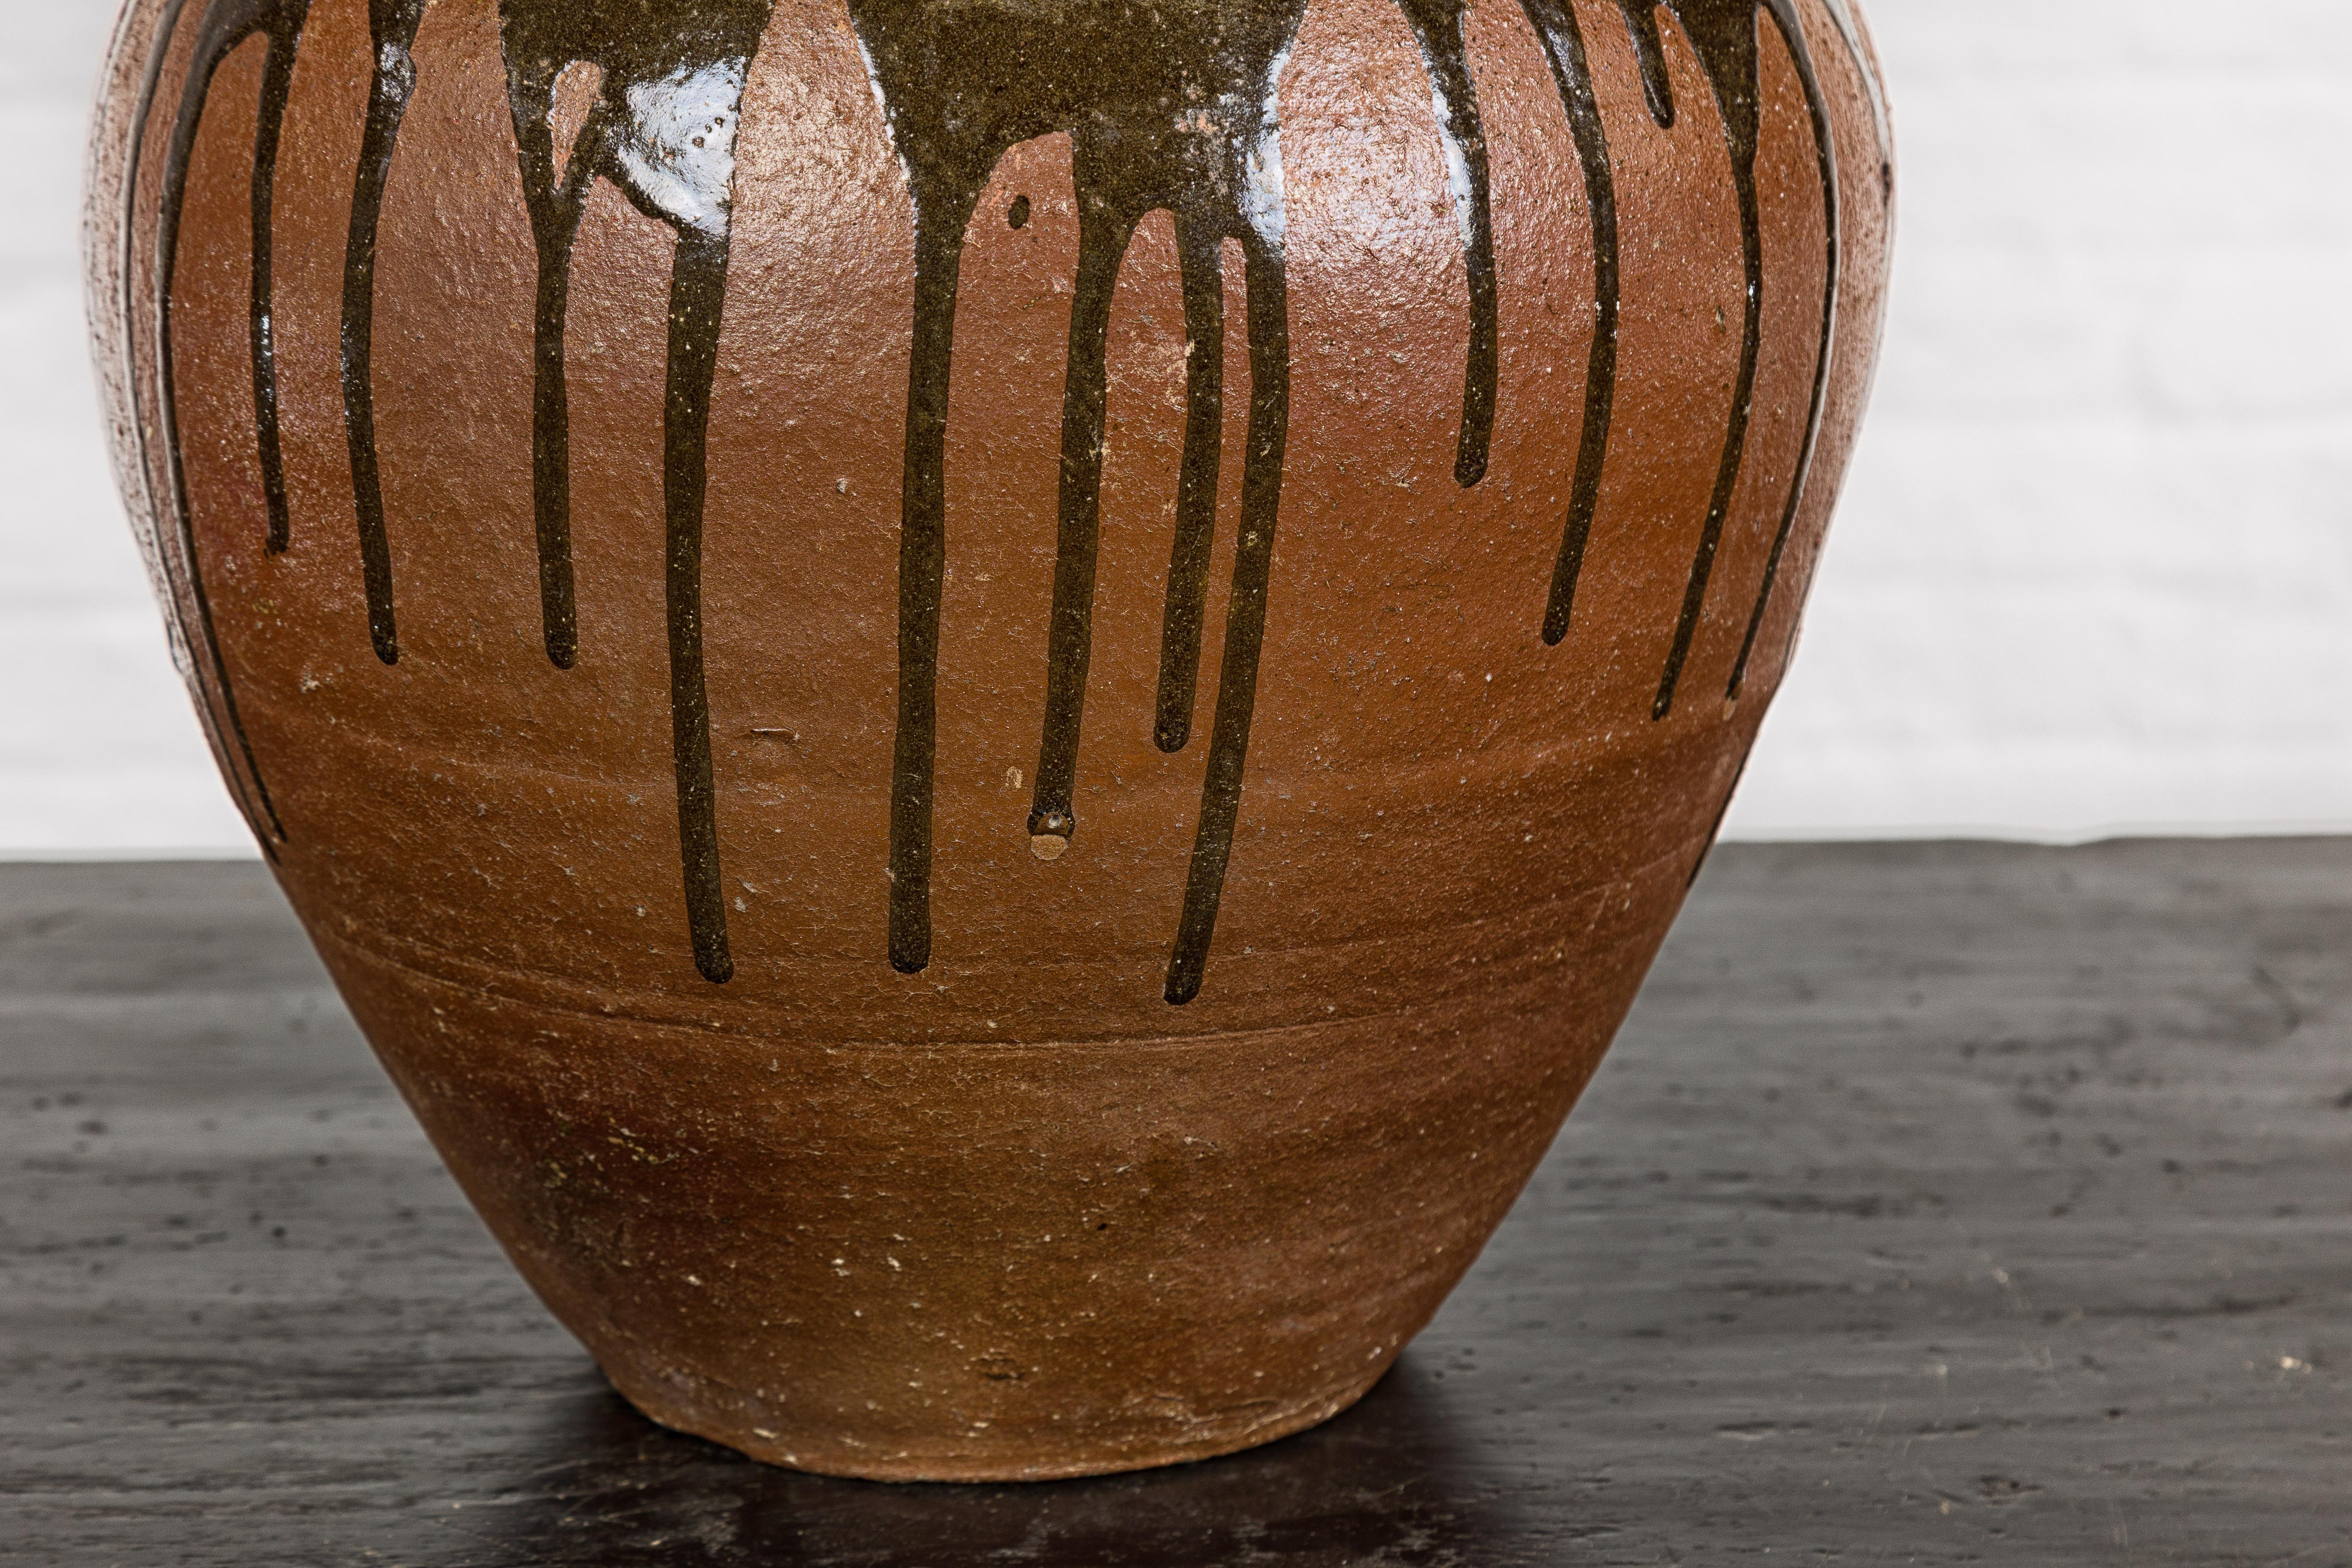 Japanese Tamba Ware Brown Glazed Ceramic Salt Pot Planter with Dripping For Sale 2